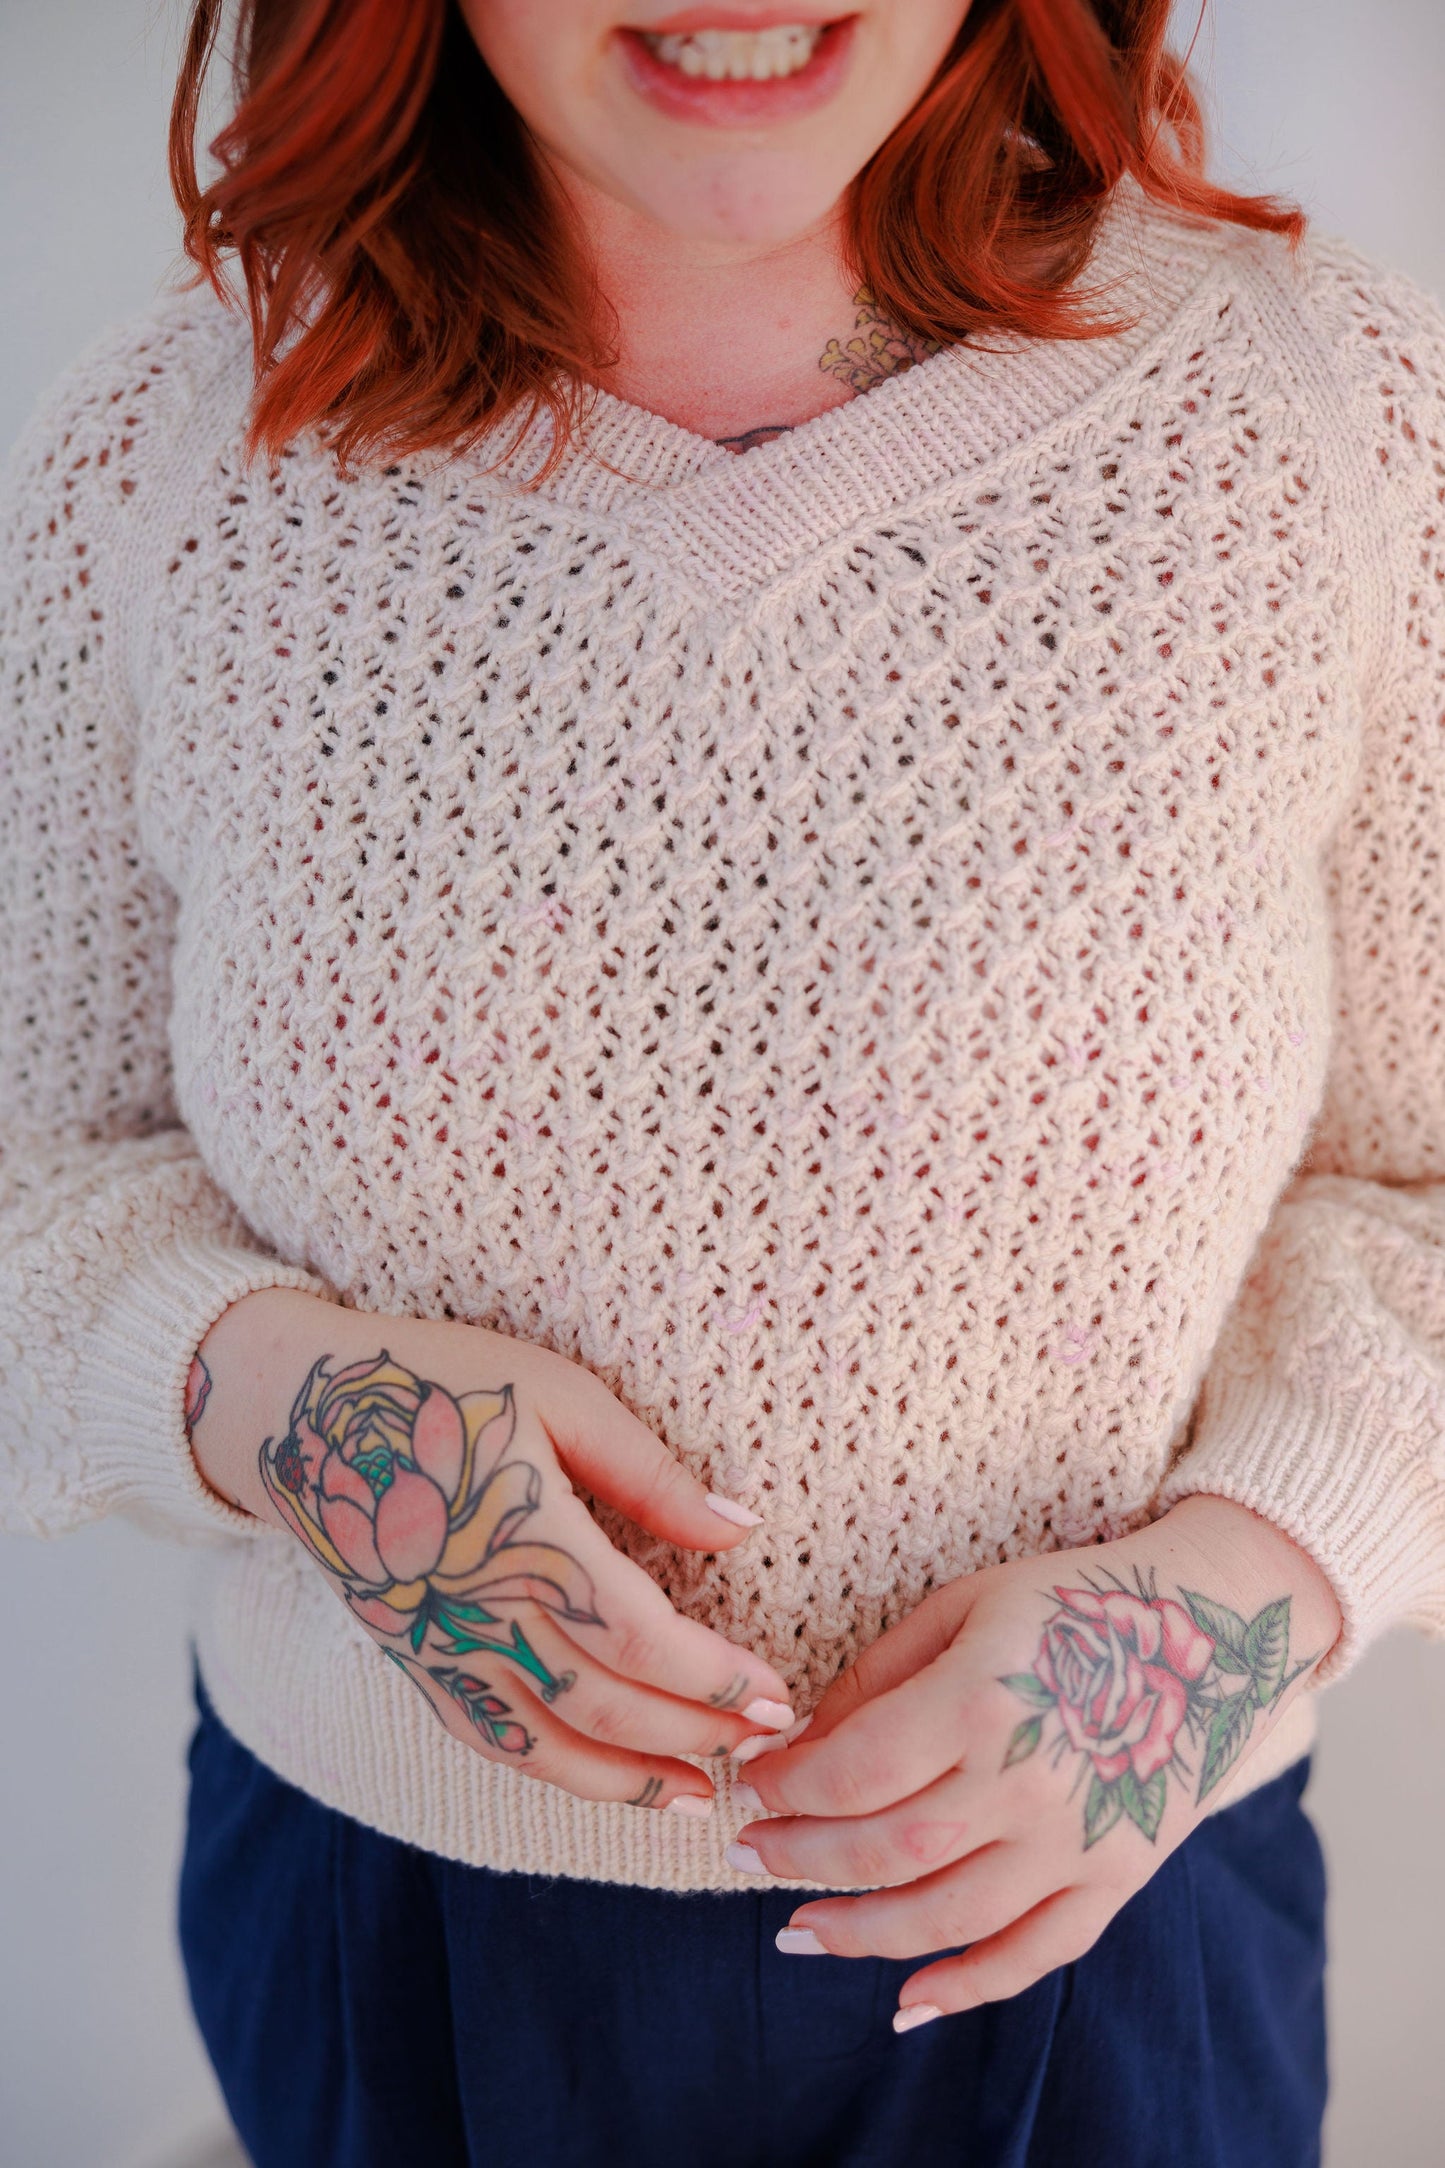 Bess wears a cream coloured lace knit sweater, the Mary raglan, with blue pants.